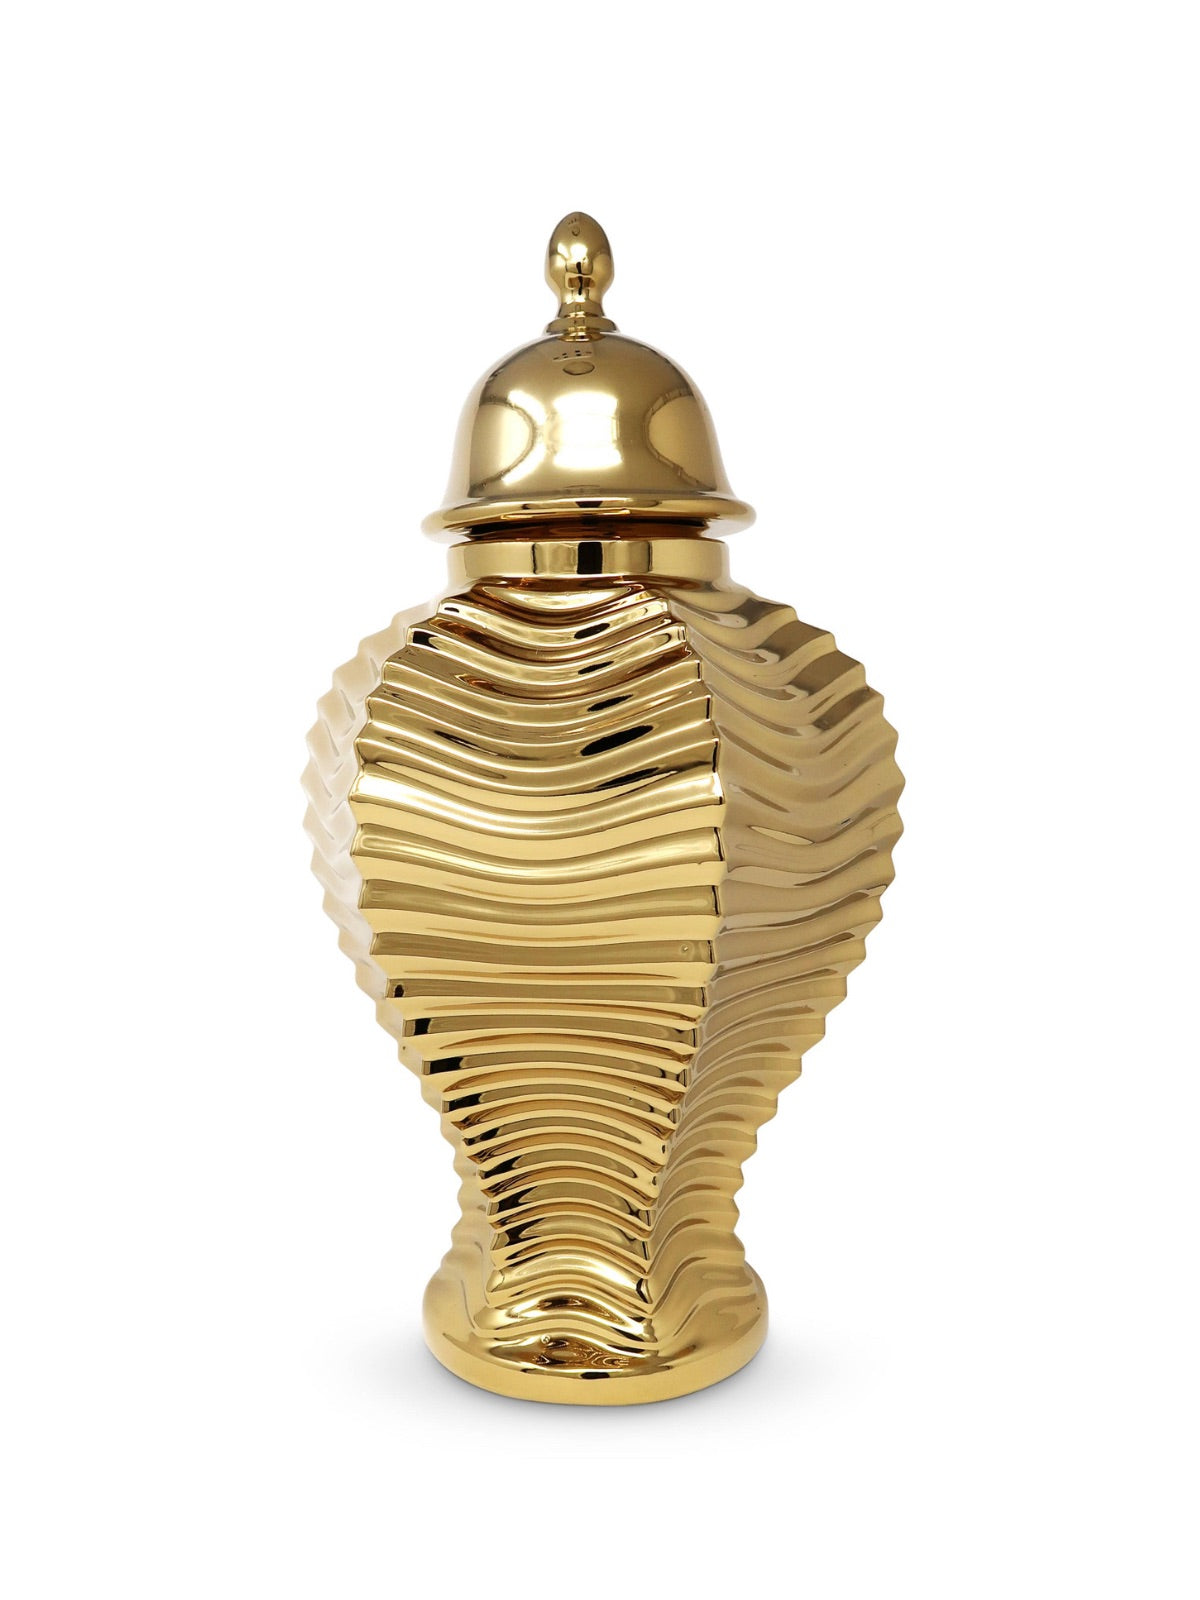 Gold Ceramic Ginger Jar with Ripple Design in Size Medium, Sold by KYA Home Decor.